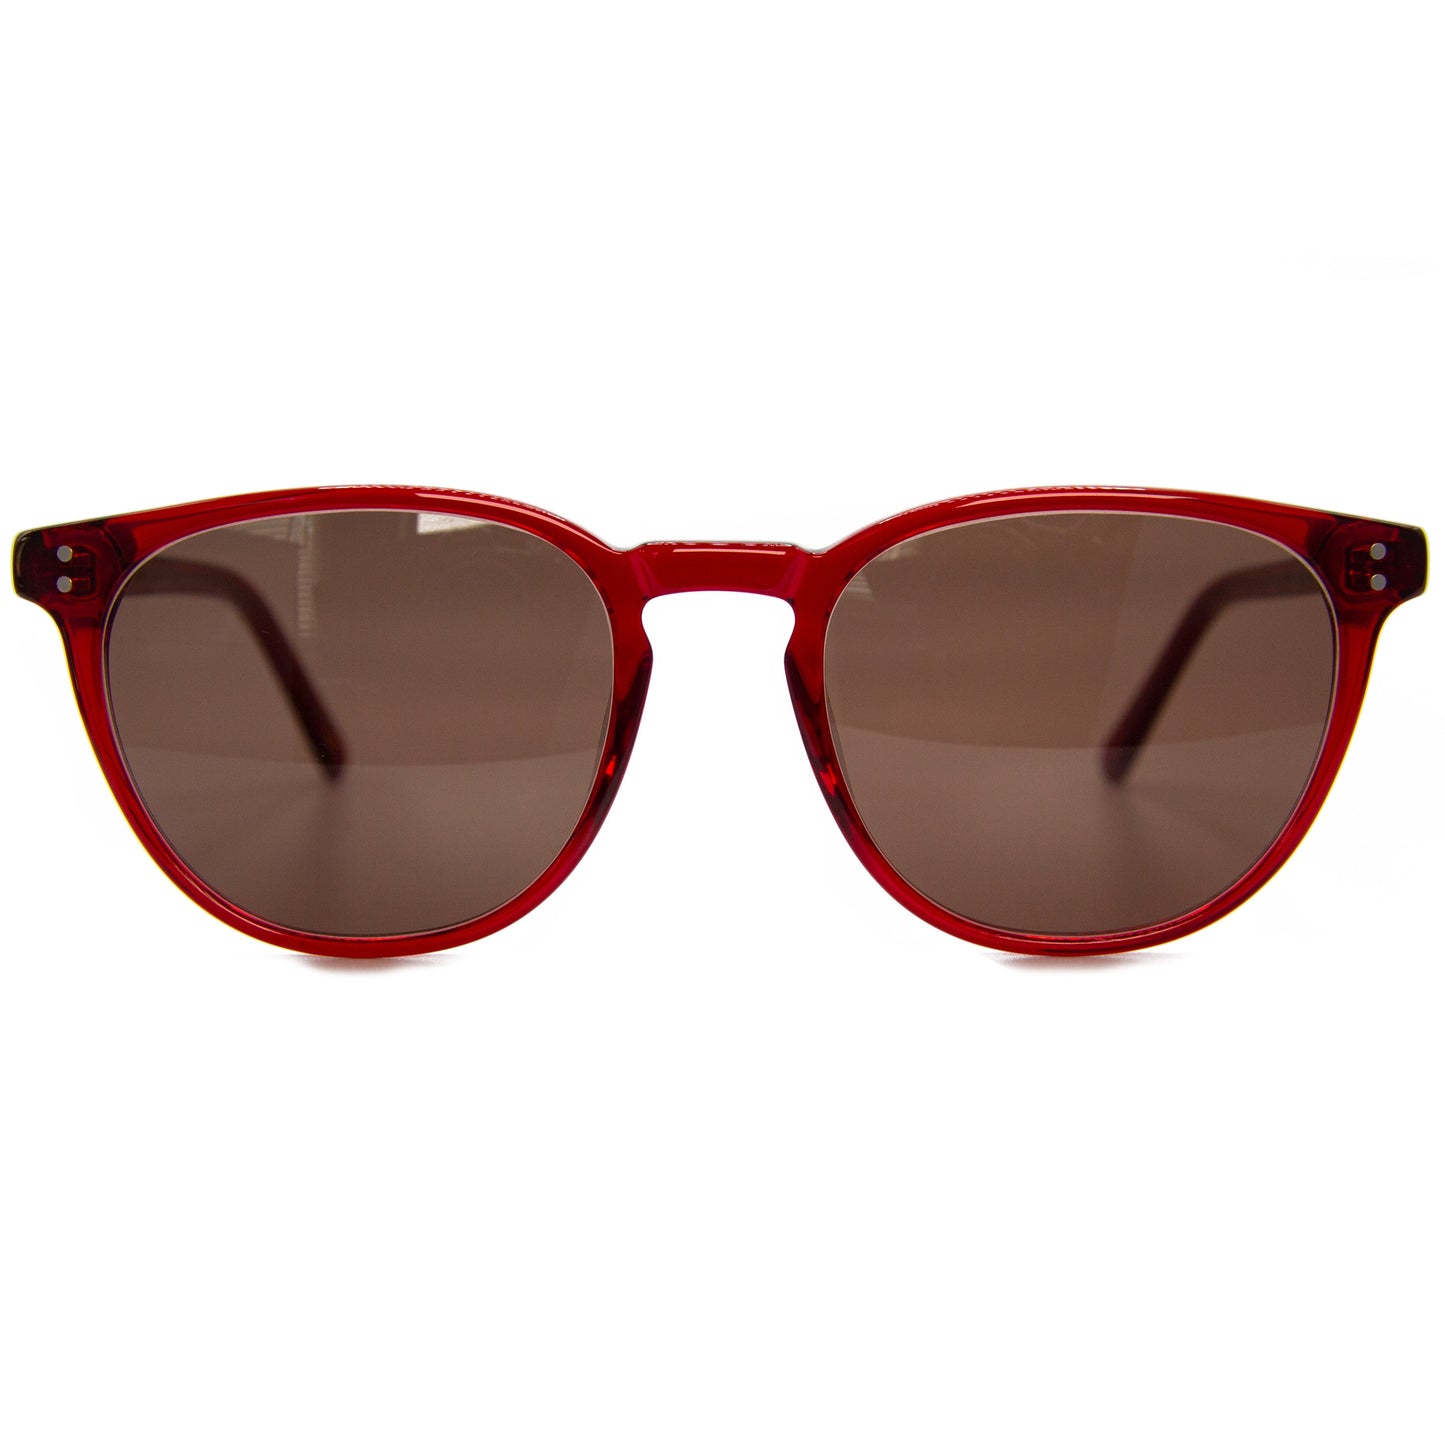 3 brothers - Ant - Red - Prescription Sunglasses